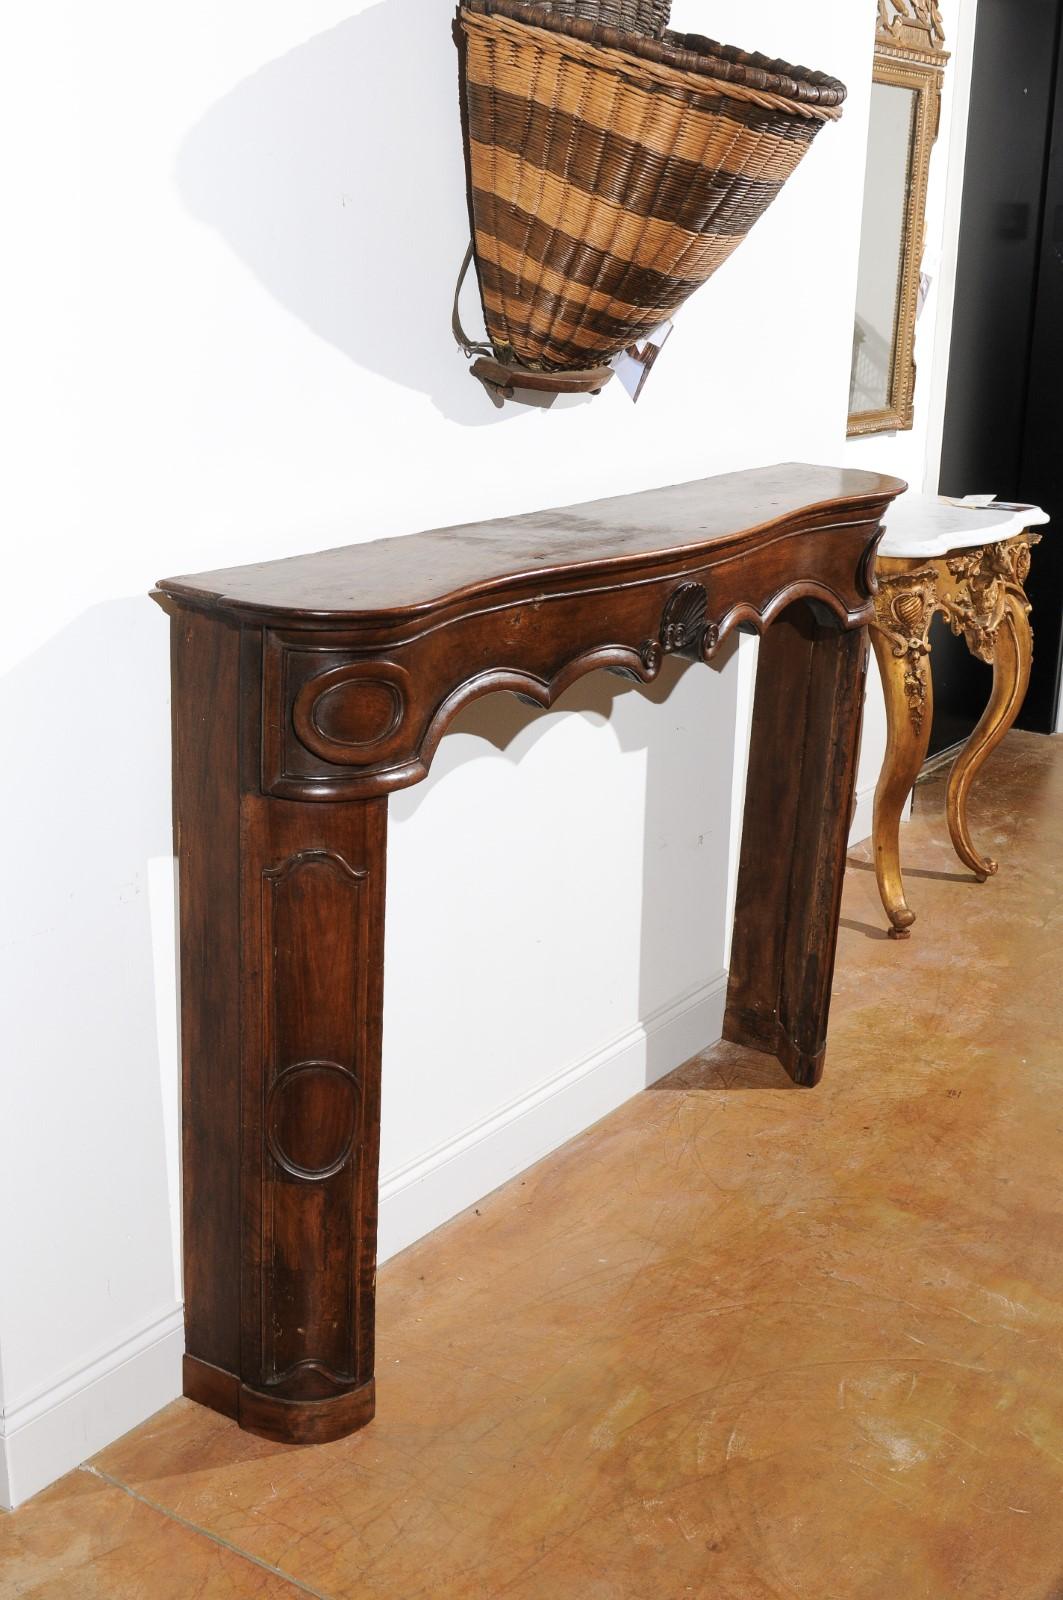 Provençal Louis XV Period 18th Century Walnut Fireplace Mantel with Carved Shell For Sale 1